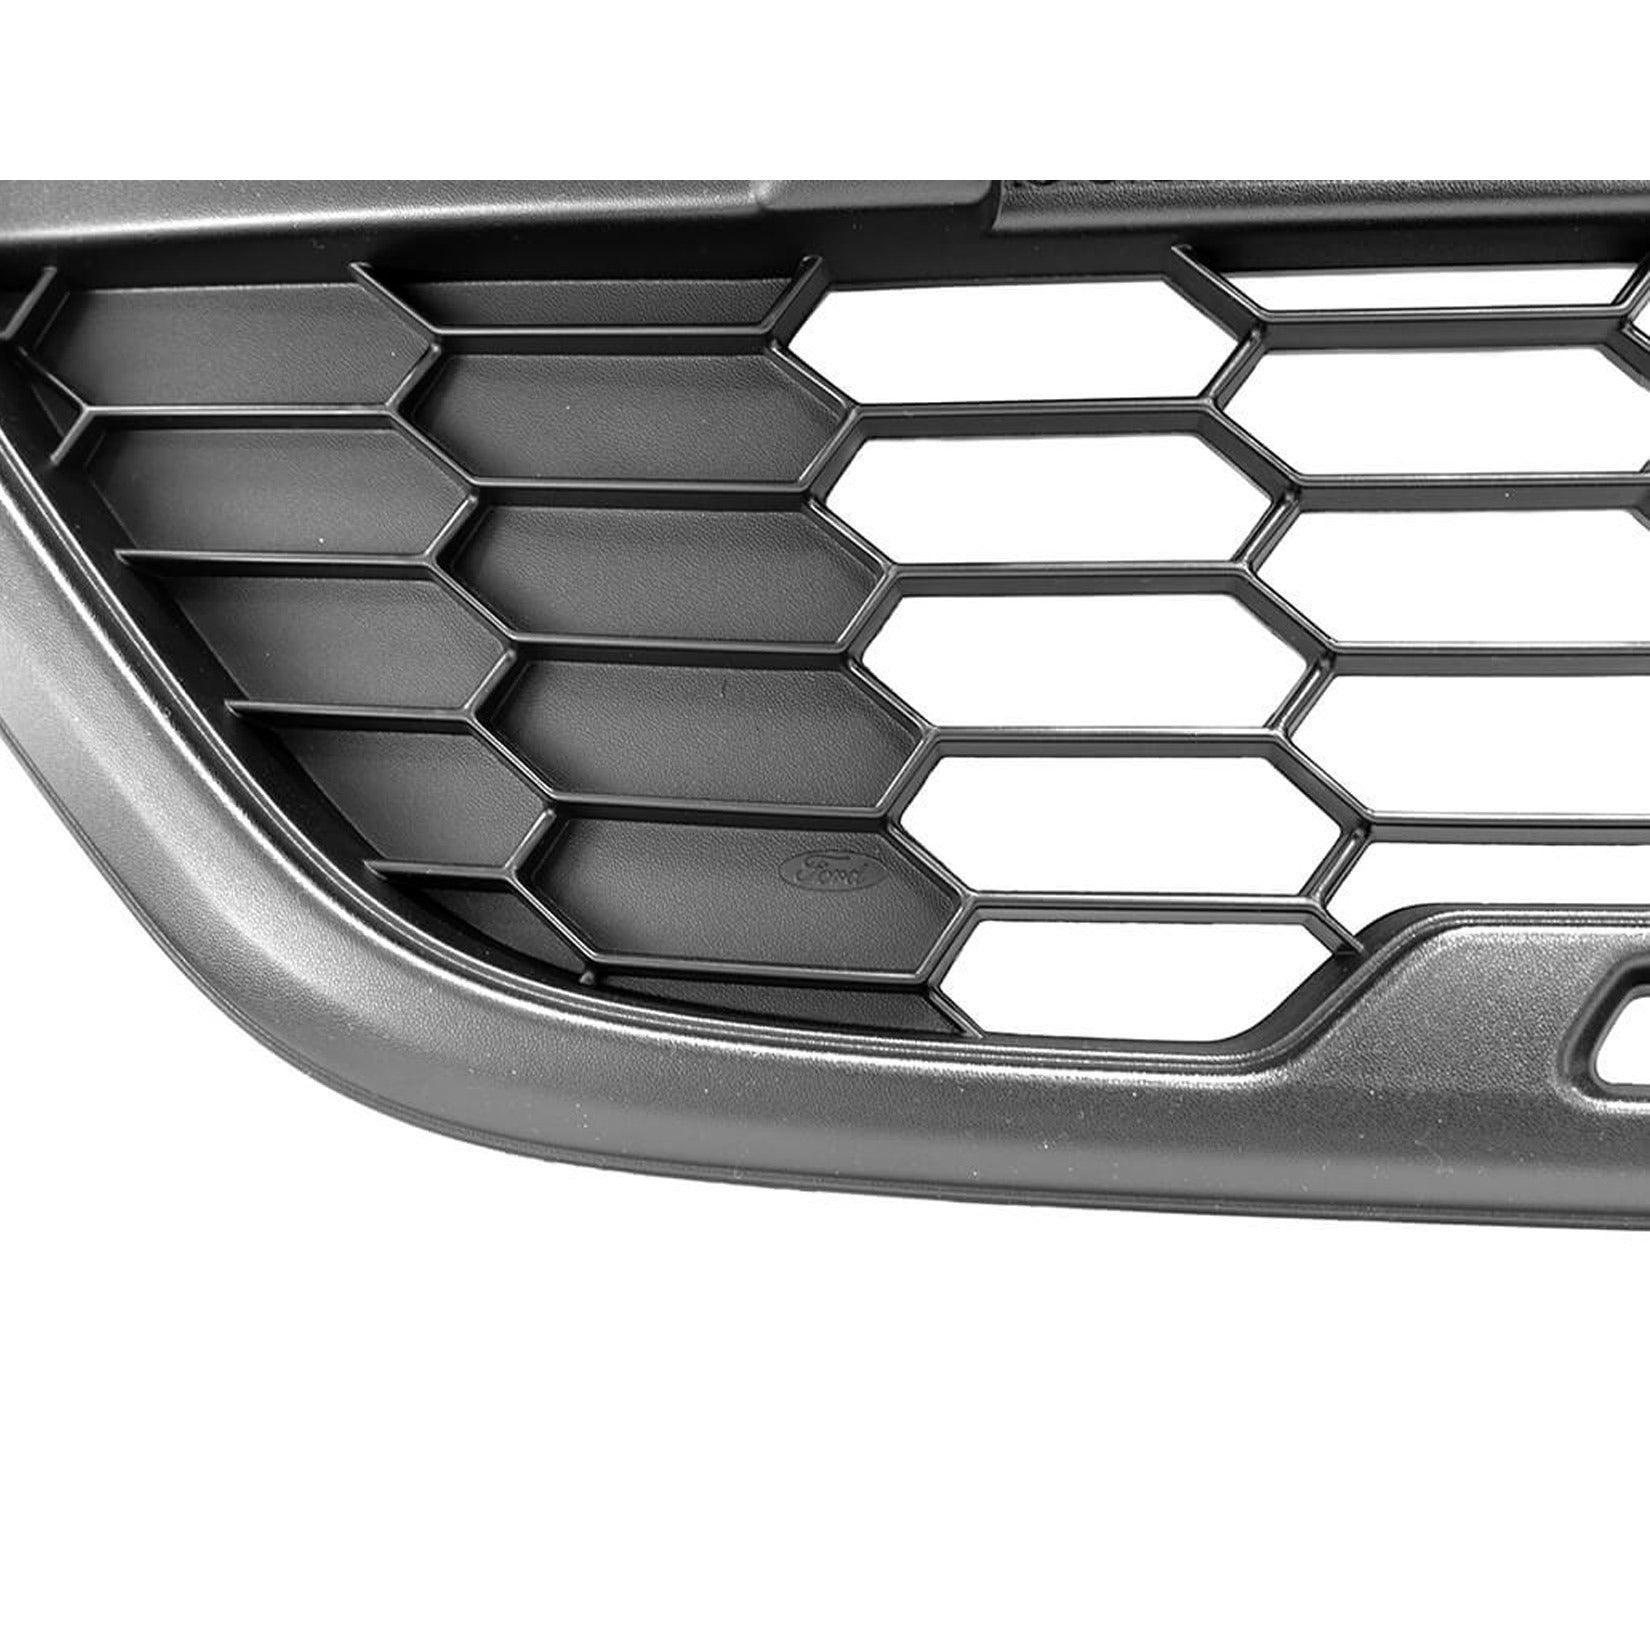 FORD TRANSIT CUSTOM 2018 ON - GENUINE FRONT RAPTOR STYLE GRILLE - Storm Xccessories2